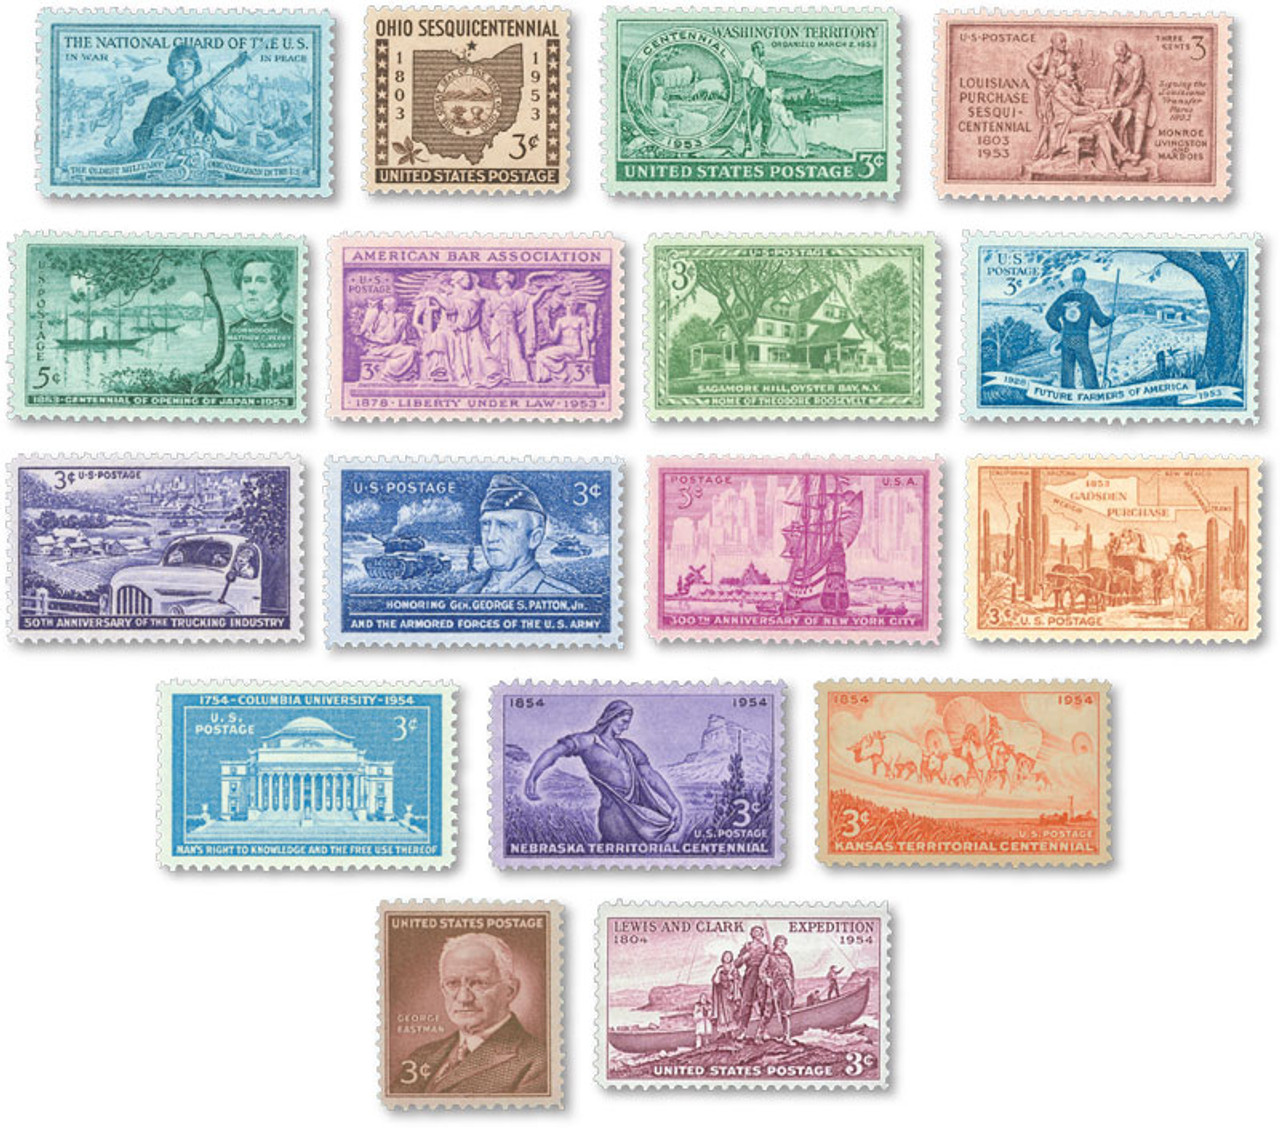 Iconic Postage Stamp Designs from History – PRINT Magazine